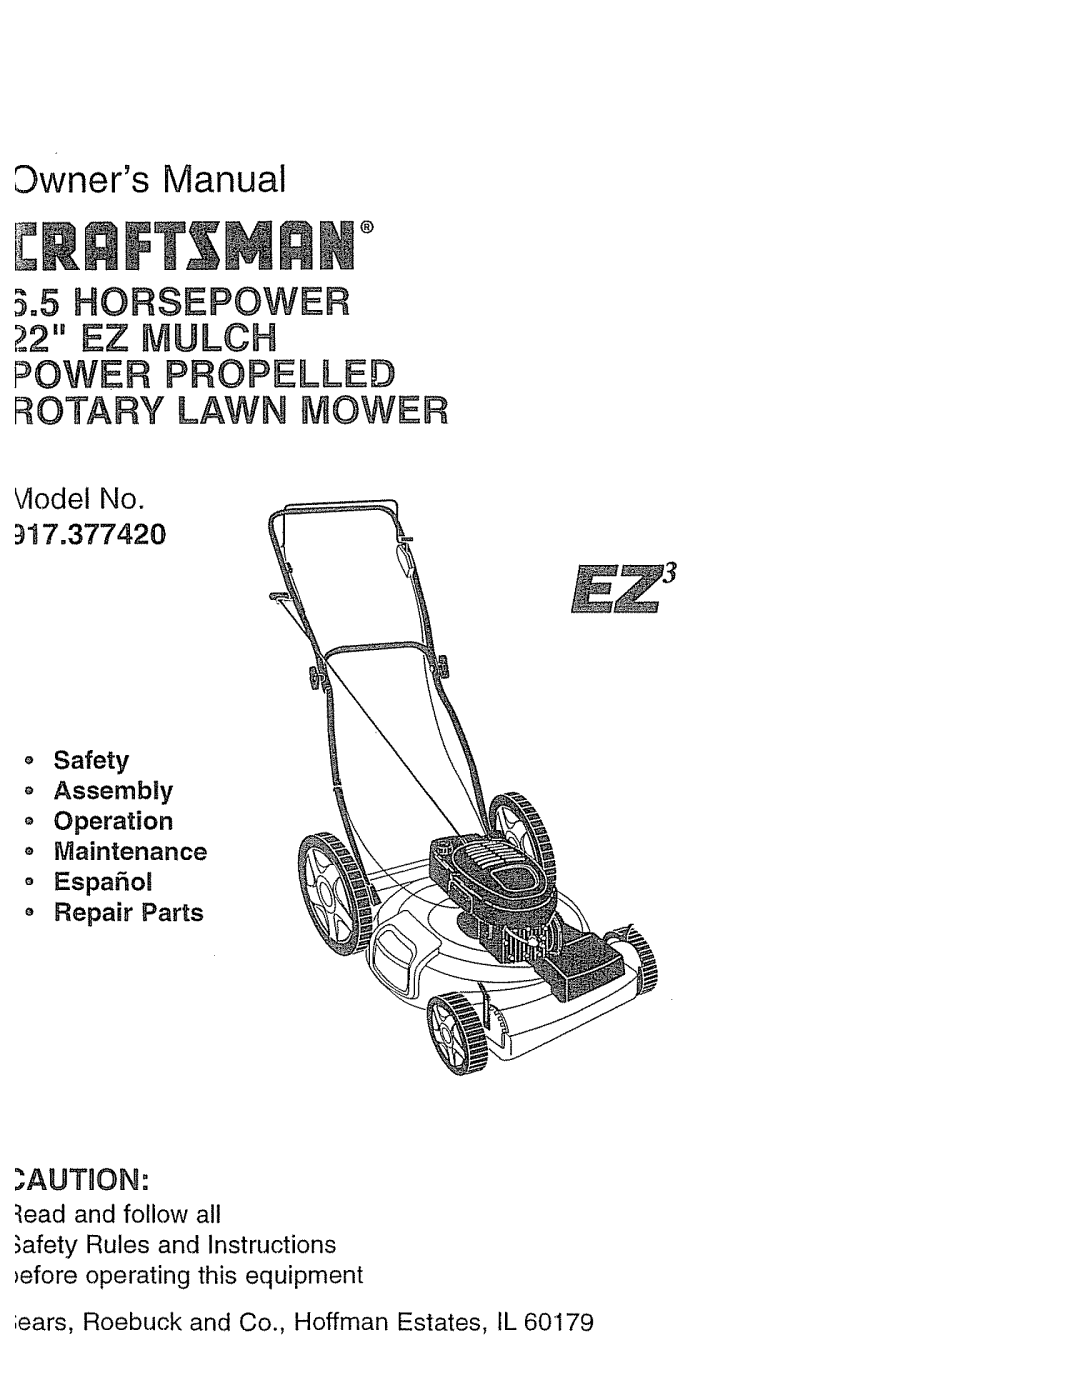 Craftsman 917.37742 owner manual Vlodel No, Horsepower Ez Mulch Power Propelled, Rotary Lawn Mower, AUTnON 